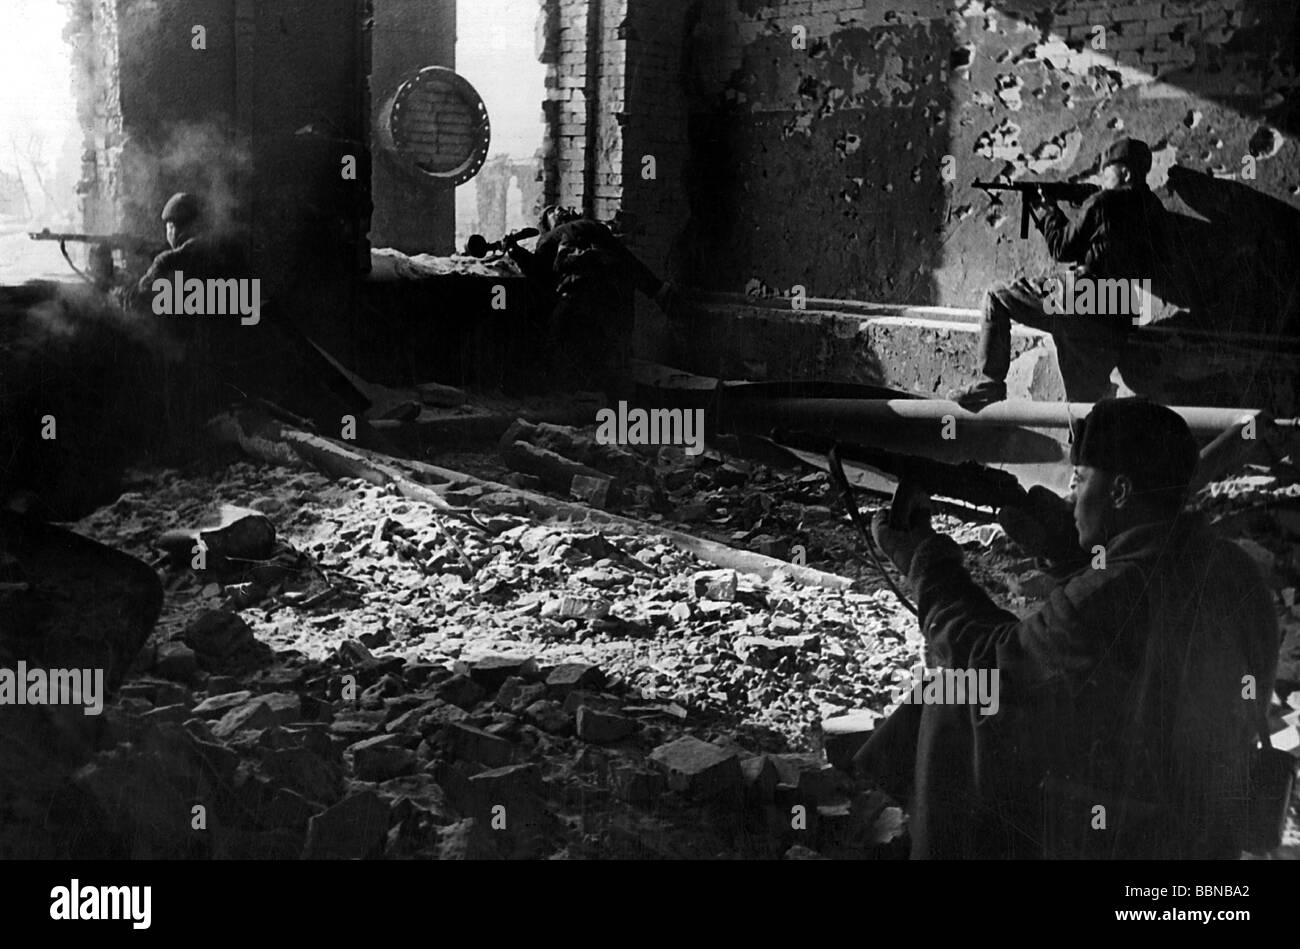 events, Second World War / WWII, Russia, Stalingrad 1942 / 1943, Soviet soldiers in the ruins of a factory, propaganda photo, Stock Photo